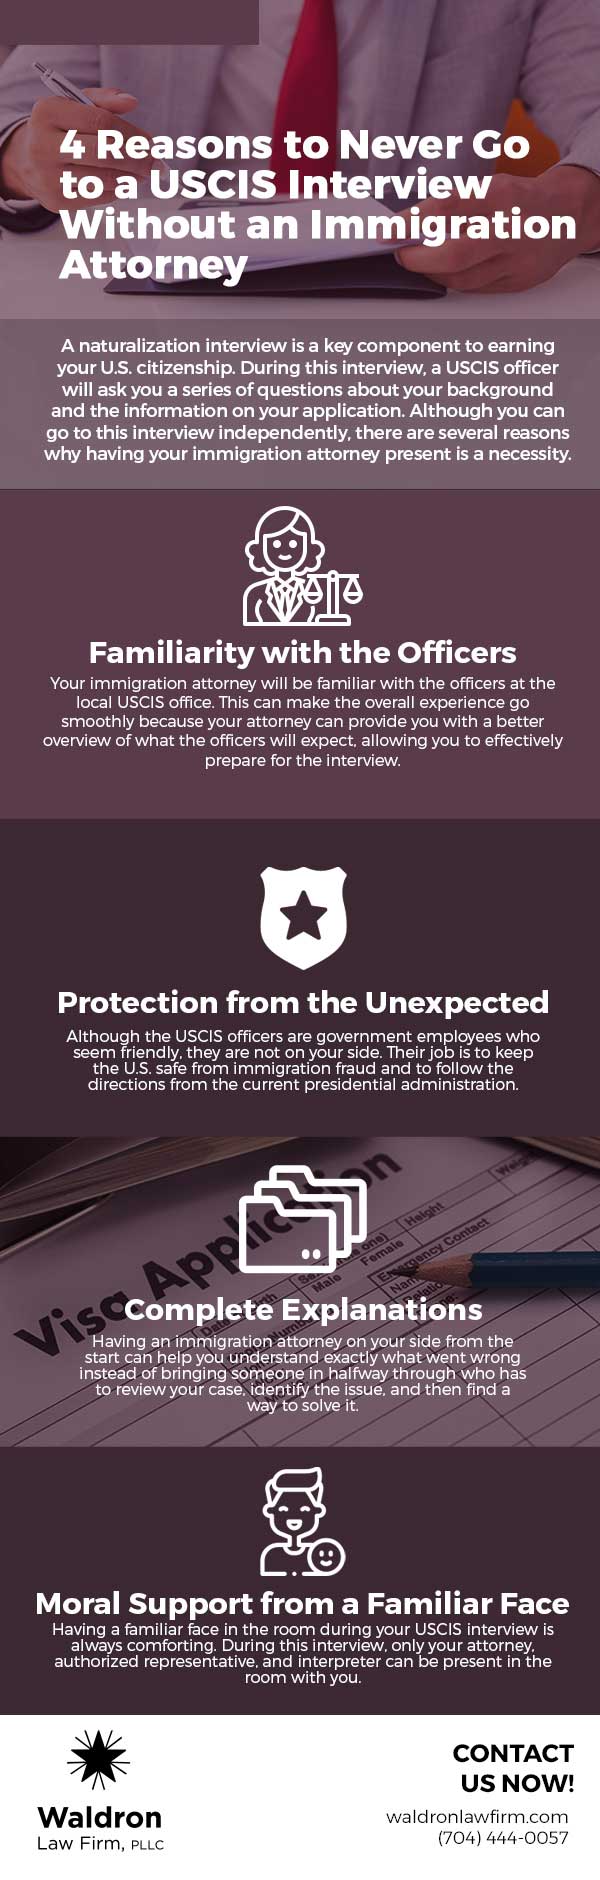 4 Reasons to Never Go to a USCIS Interview Without an Immigration Attorney  [infographic] | Waldron Law Firm, PLLC